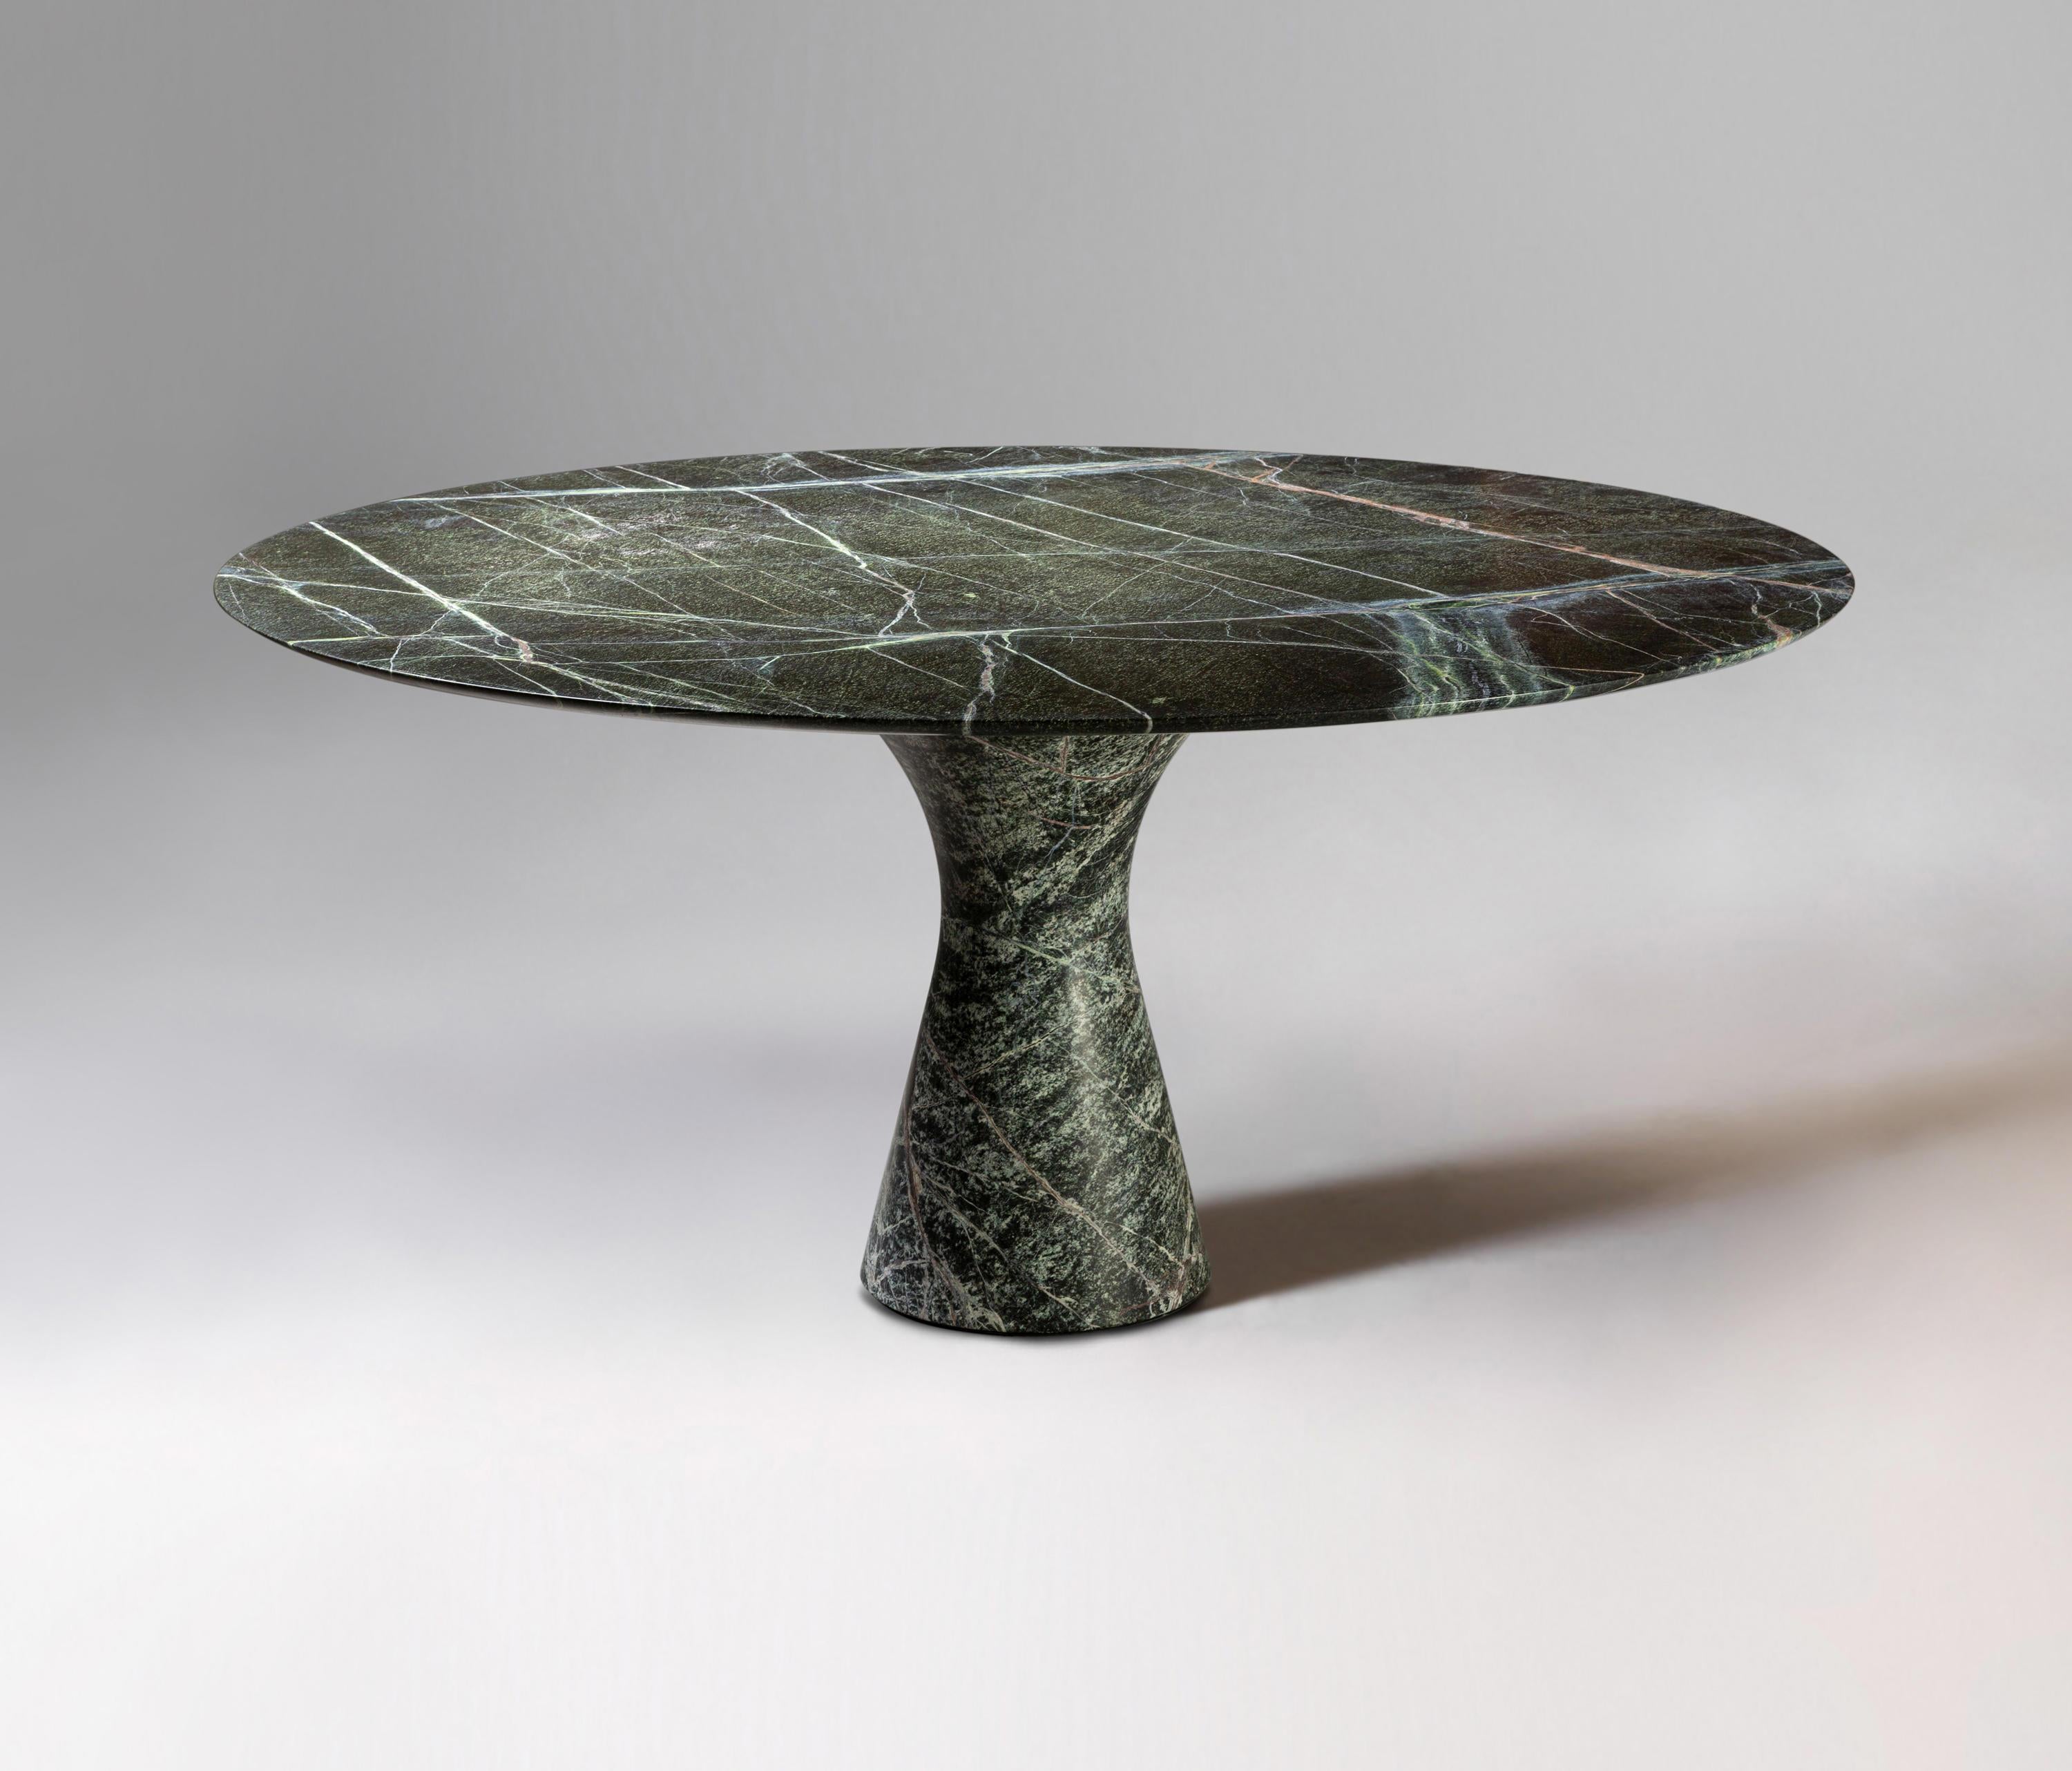 Picasso green refined contemporary marble dining table 130/75
Dimensions: 130 x 75 cm
Materials: Picasso Green

Angelo is the essence of a round table in natural stone, a sculptural shape in robust material with elegant lines and refined